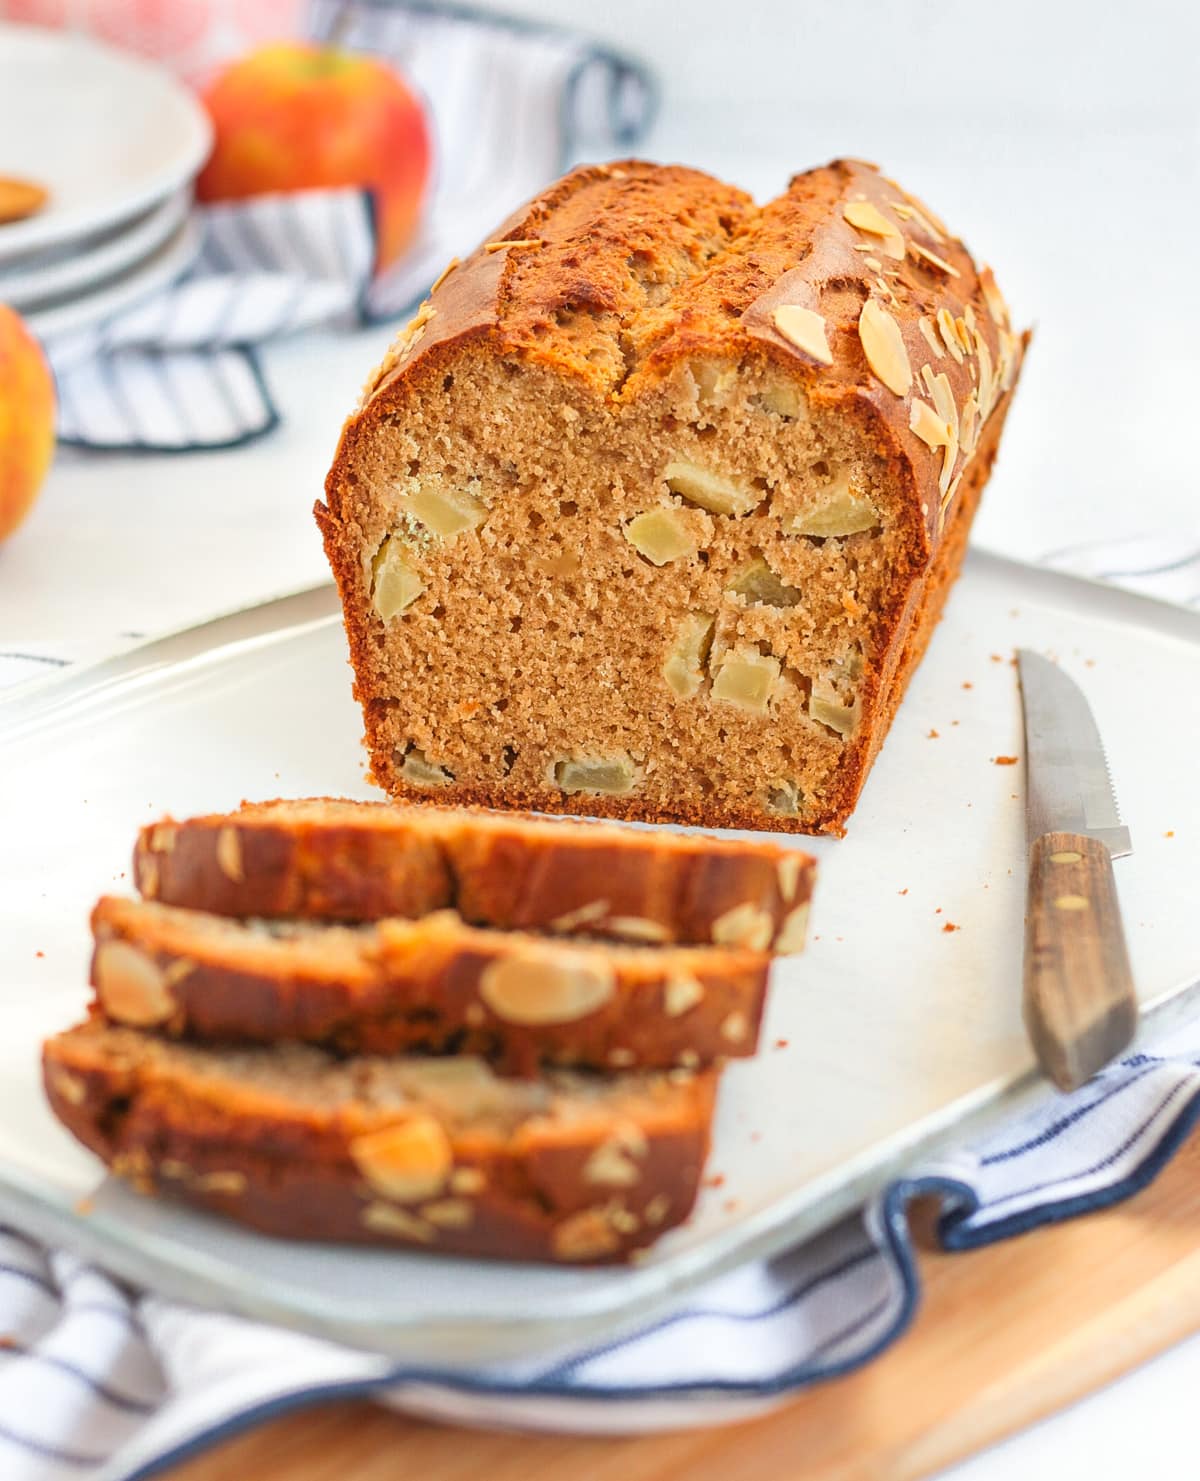 Apple Loaf Cake with Applesauce - A Baking Journey